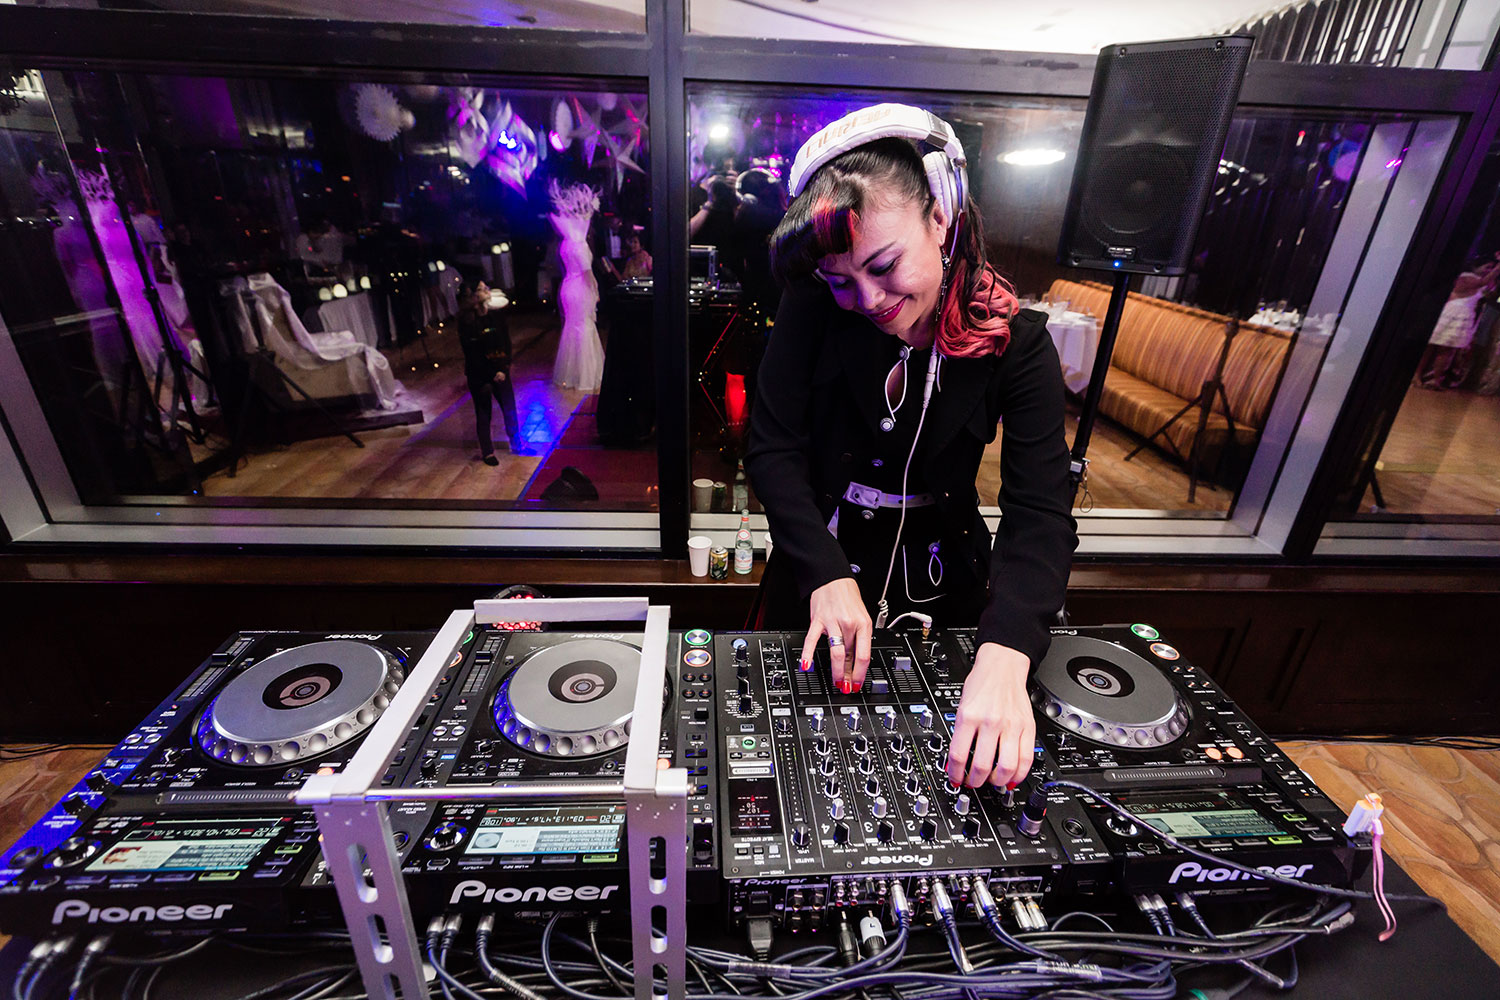 We provide DJ booking services. If you want guests dancing at your next party or corporate event hire a professional DJ. We provide DJs for hire for events in Hong Kong. Our Hong Kong DJs can play any genre of music - pop, disco, techno or lounge music. We also provide DJ equipment rentals.